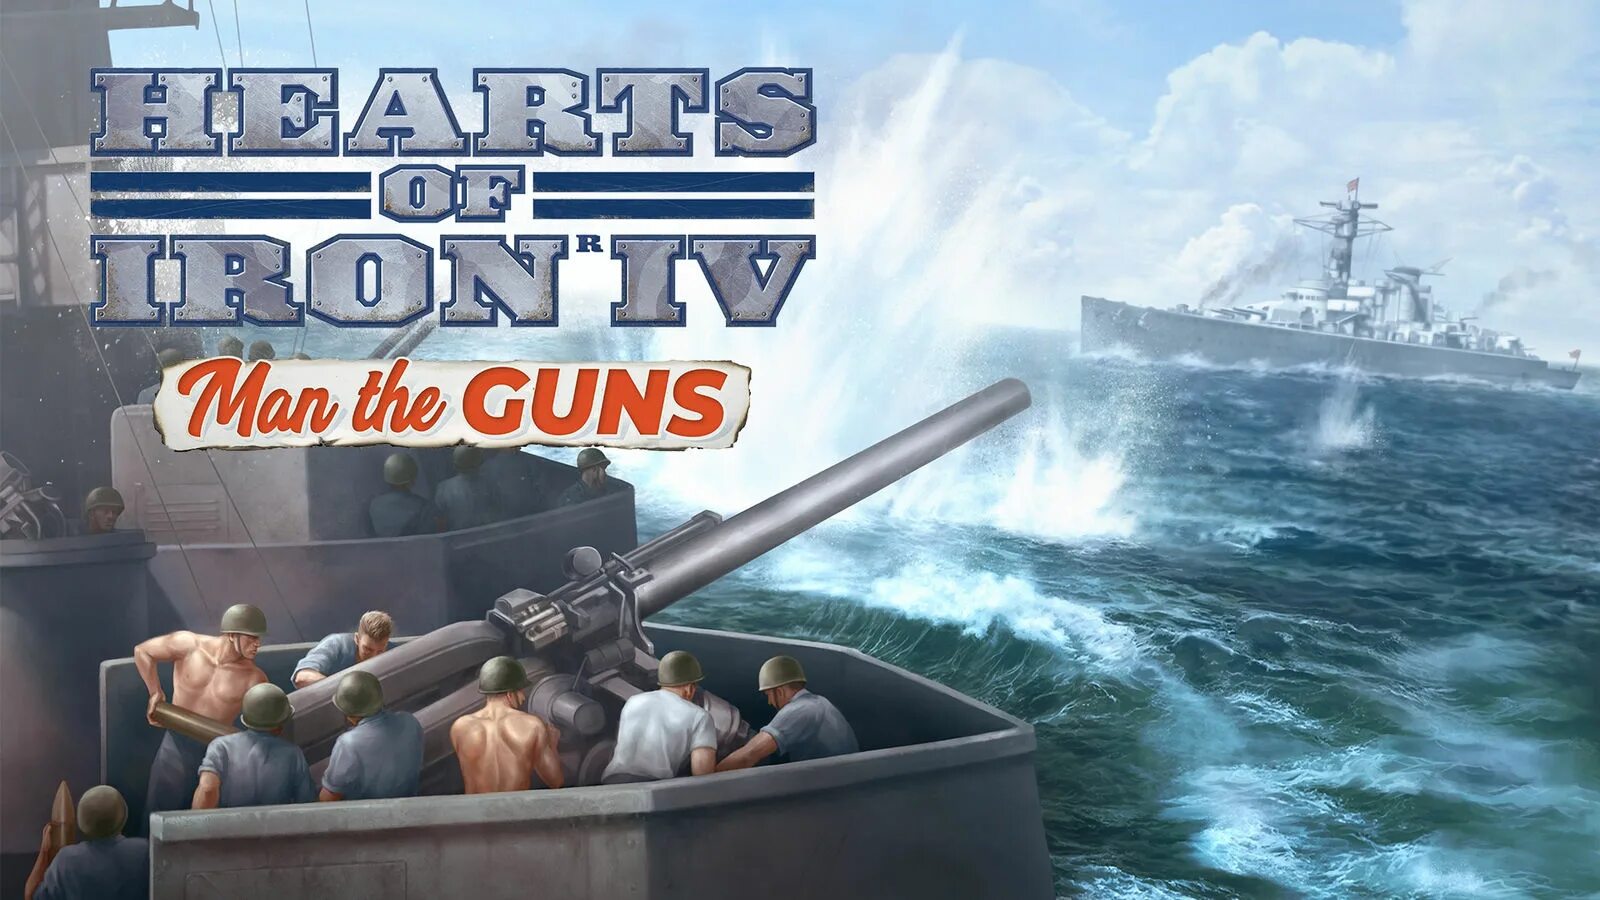 Man the guns. Hearts of Iron IV: Cadet Edition. Expansion - Hearts of Iron IV: together for Victory. Hoi4 waking the Tiger Wallpapers.